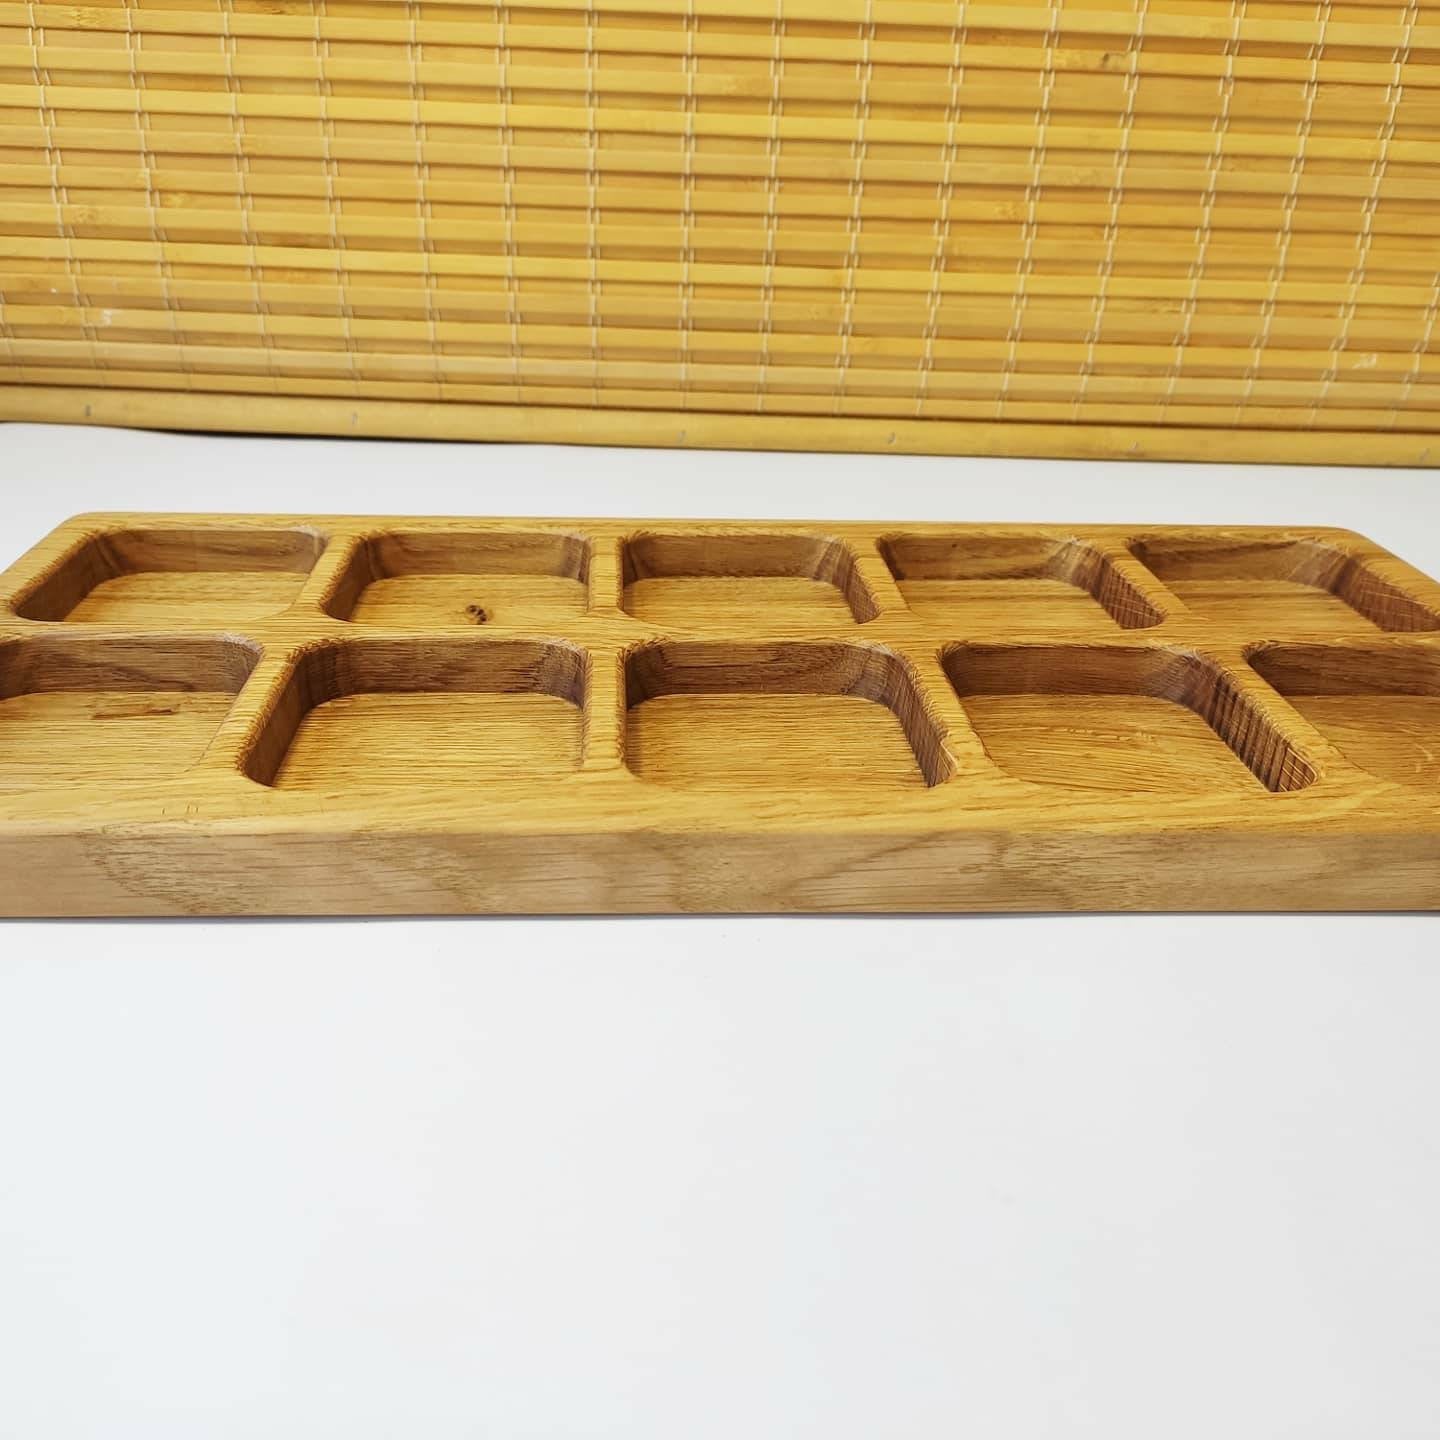 Montessori sorting trays with 10 sections WITHOUT numbers